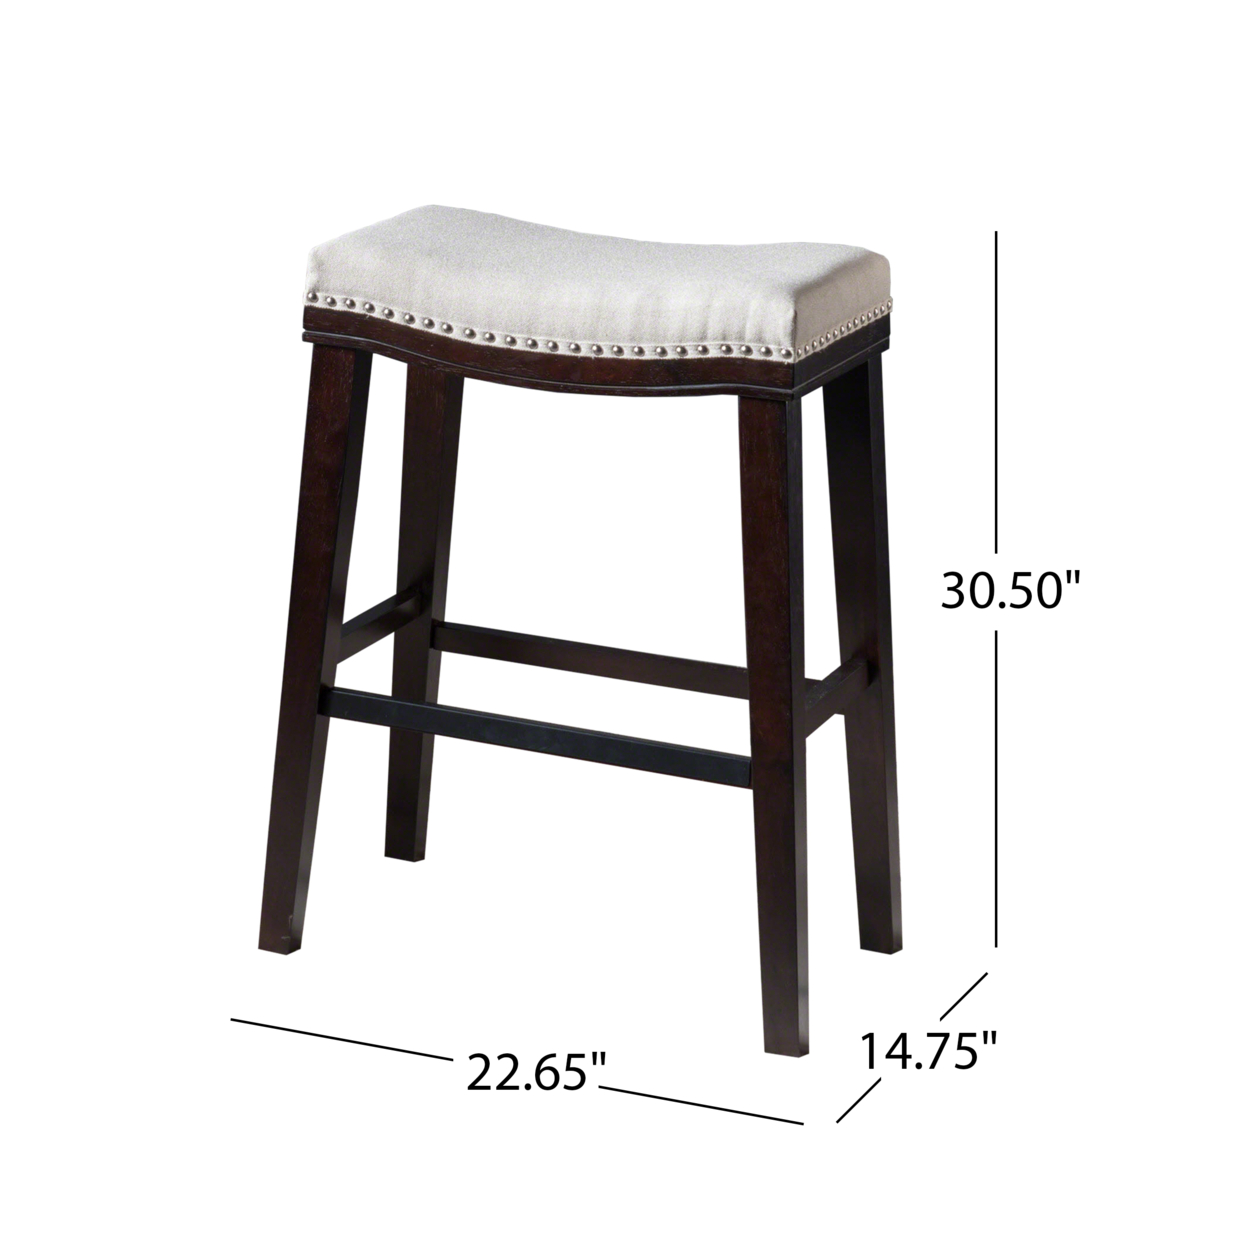 Kainu Contemporary Upholstered Saddle Barstool With Nailhead Trim (Set Of 2) - Brown